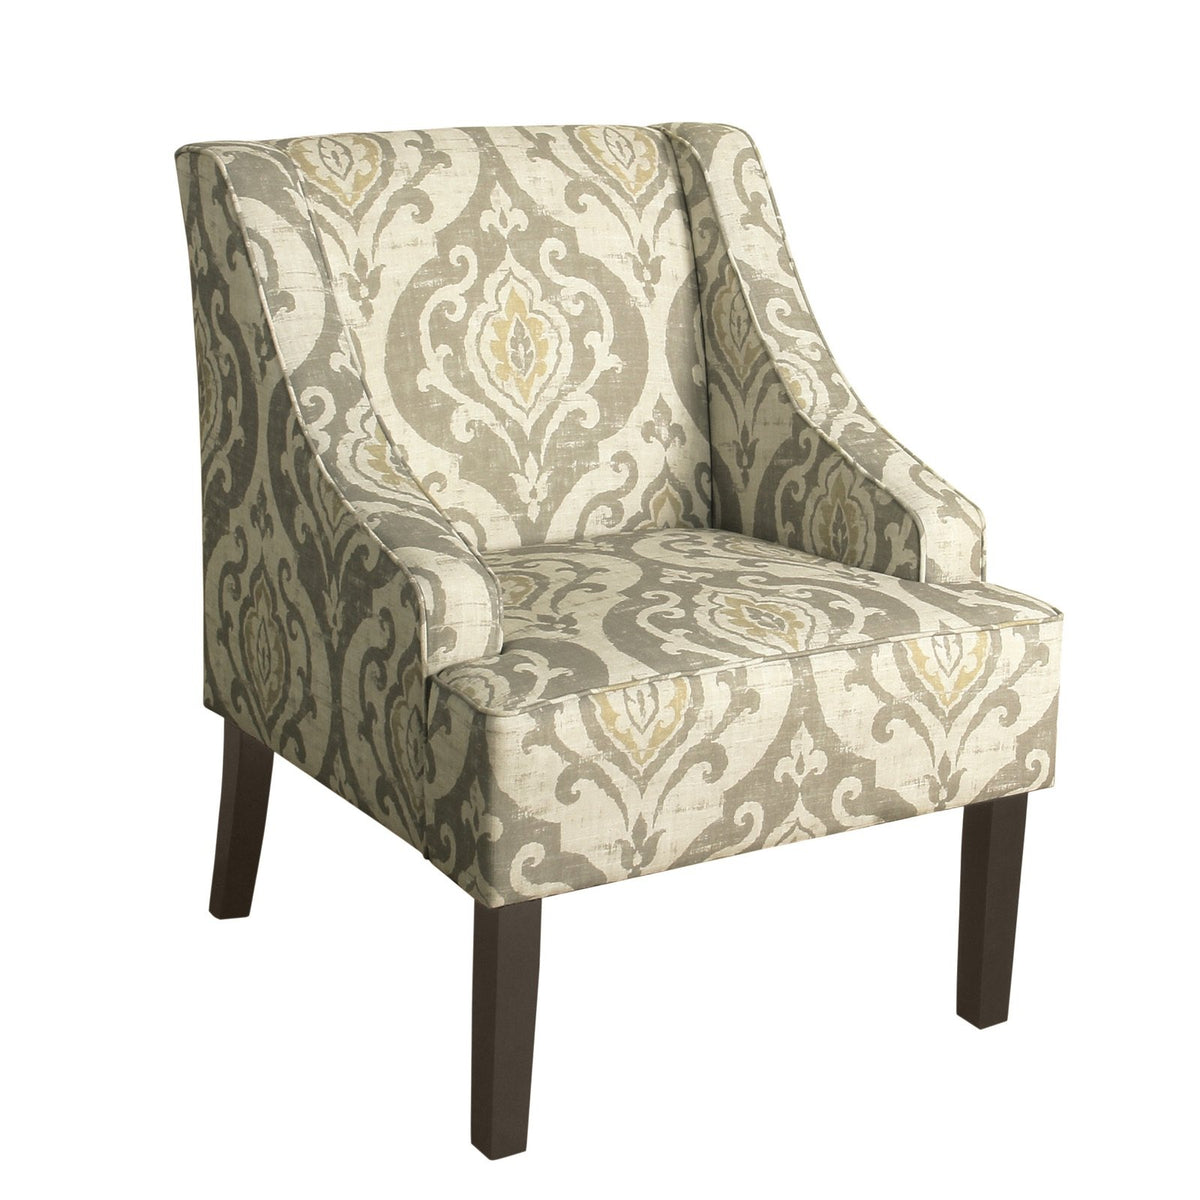 BM194000 - Fabric Upholstered Wooden Accent Chair with Damask Pattern Design, Multicolor